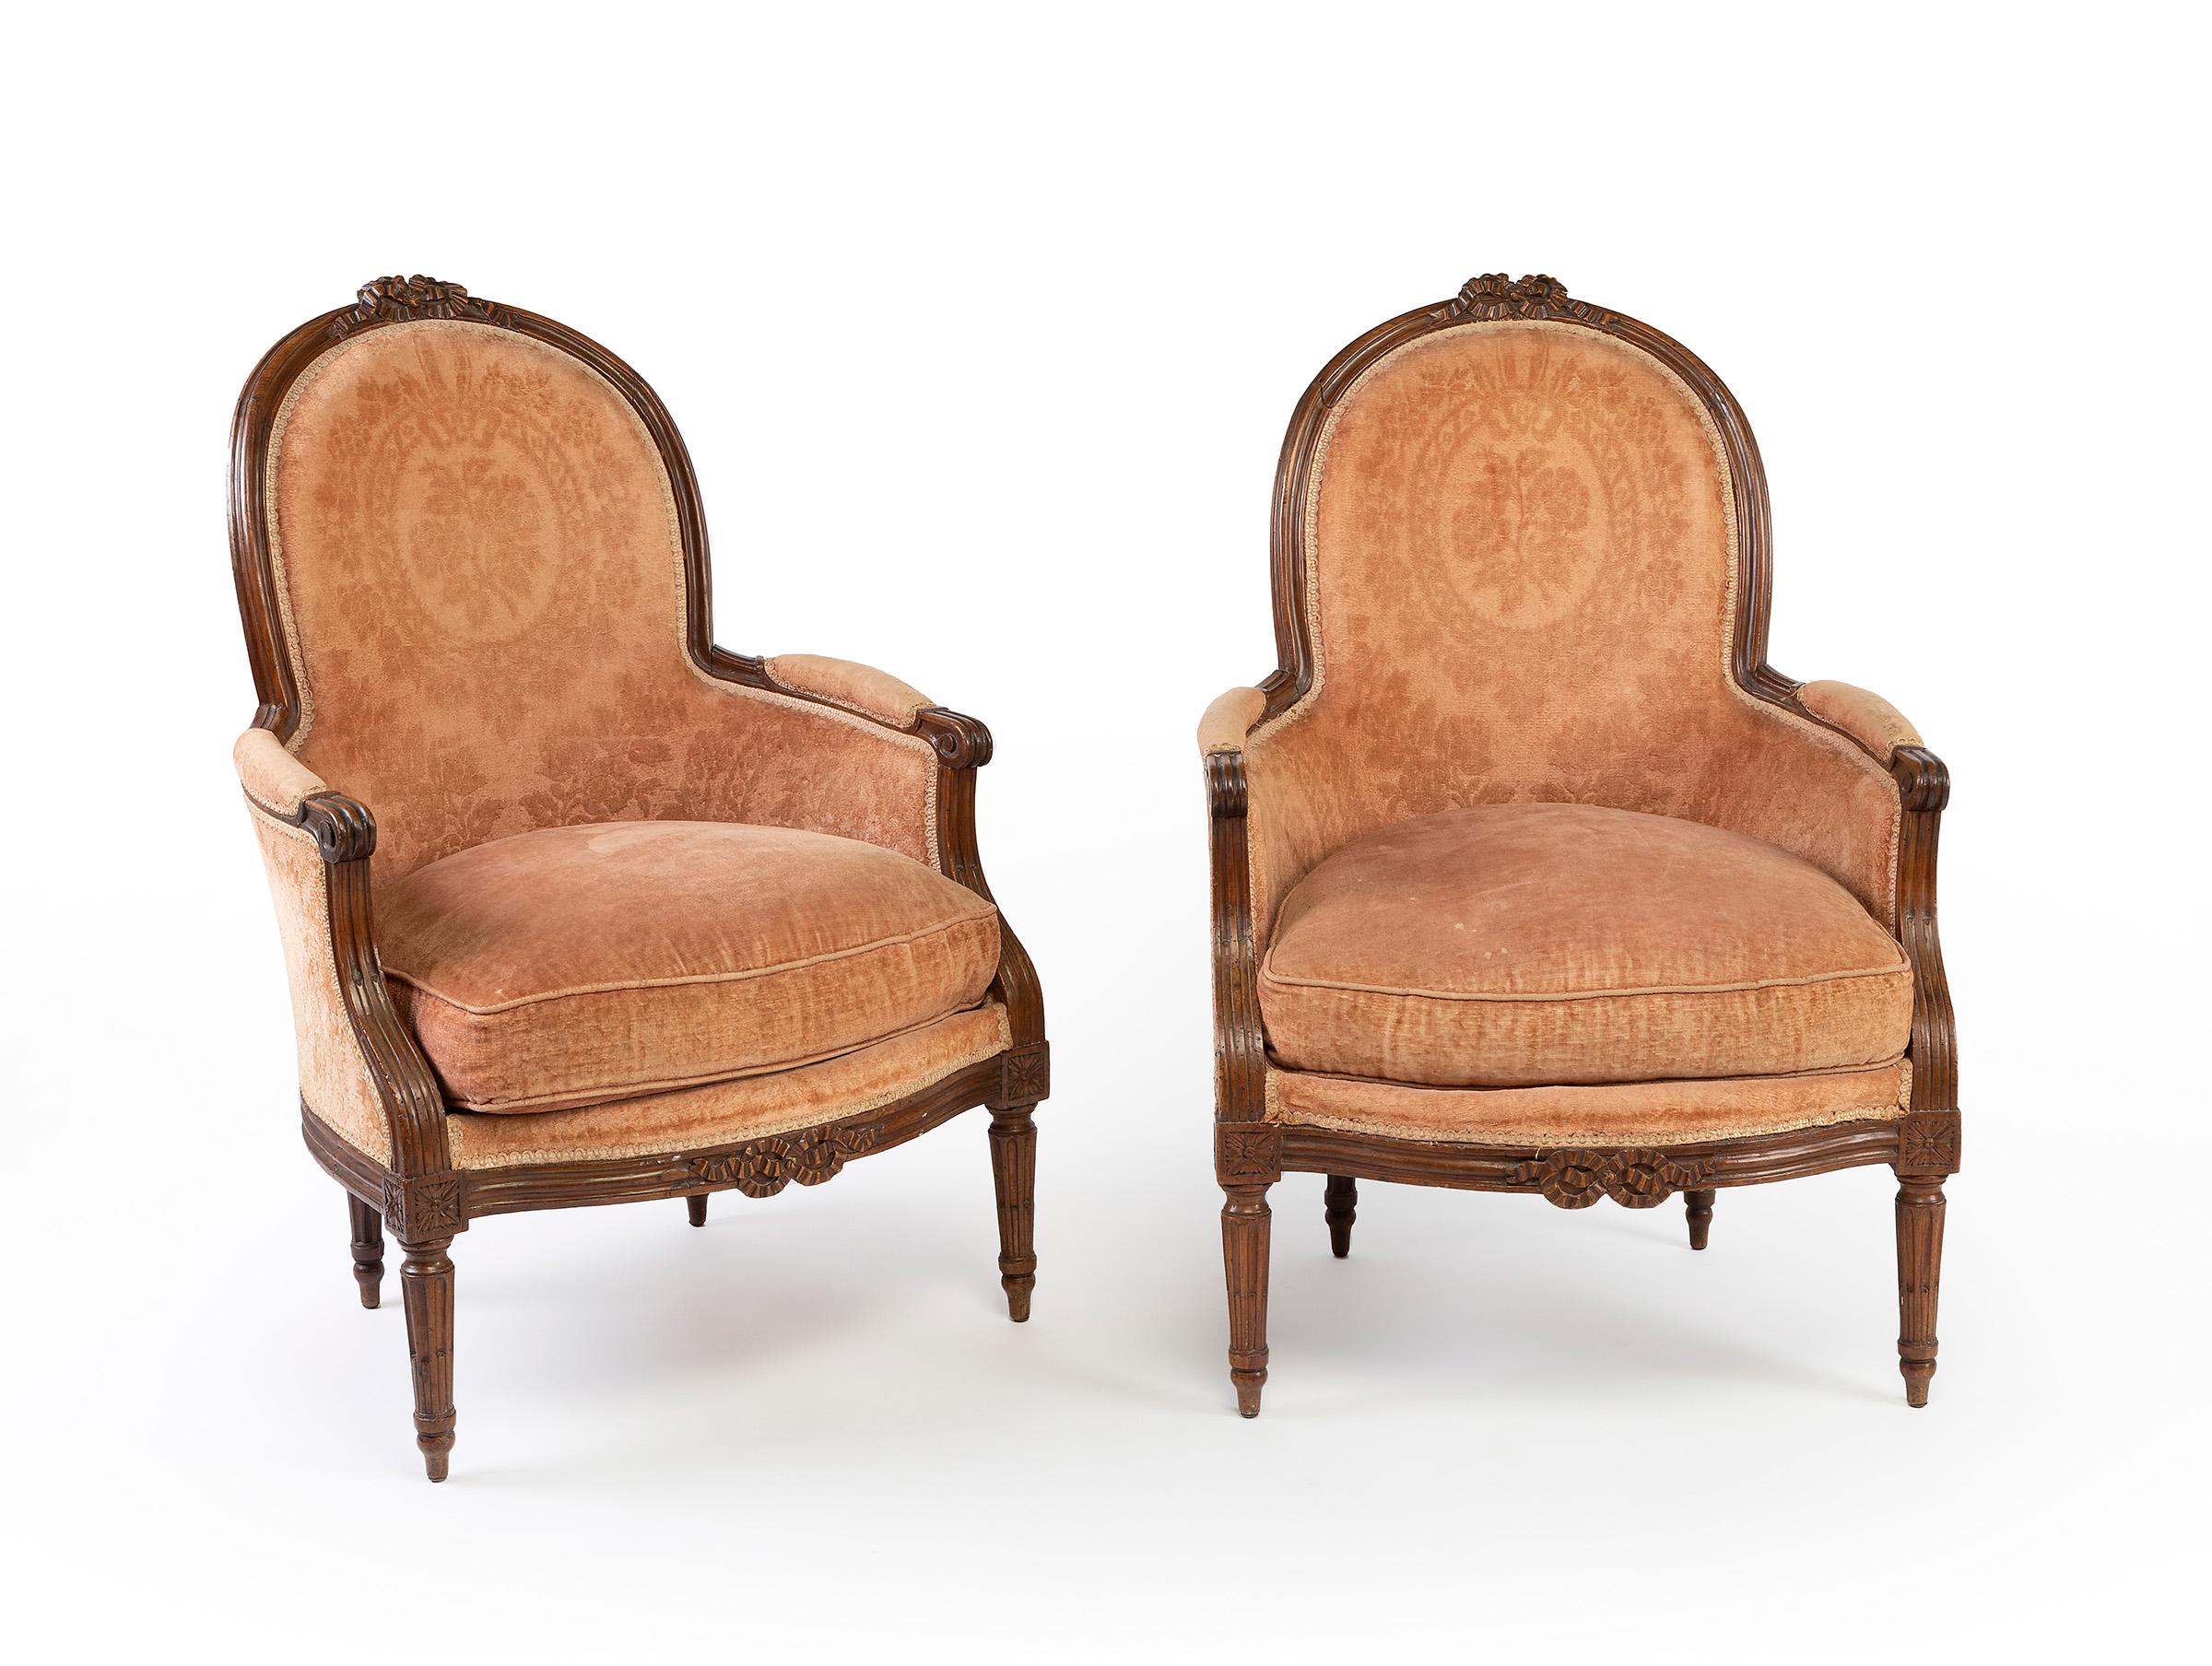 Set of two Louis XVI armchairs, second half of the 18th century, and a matching footrest of later